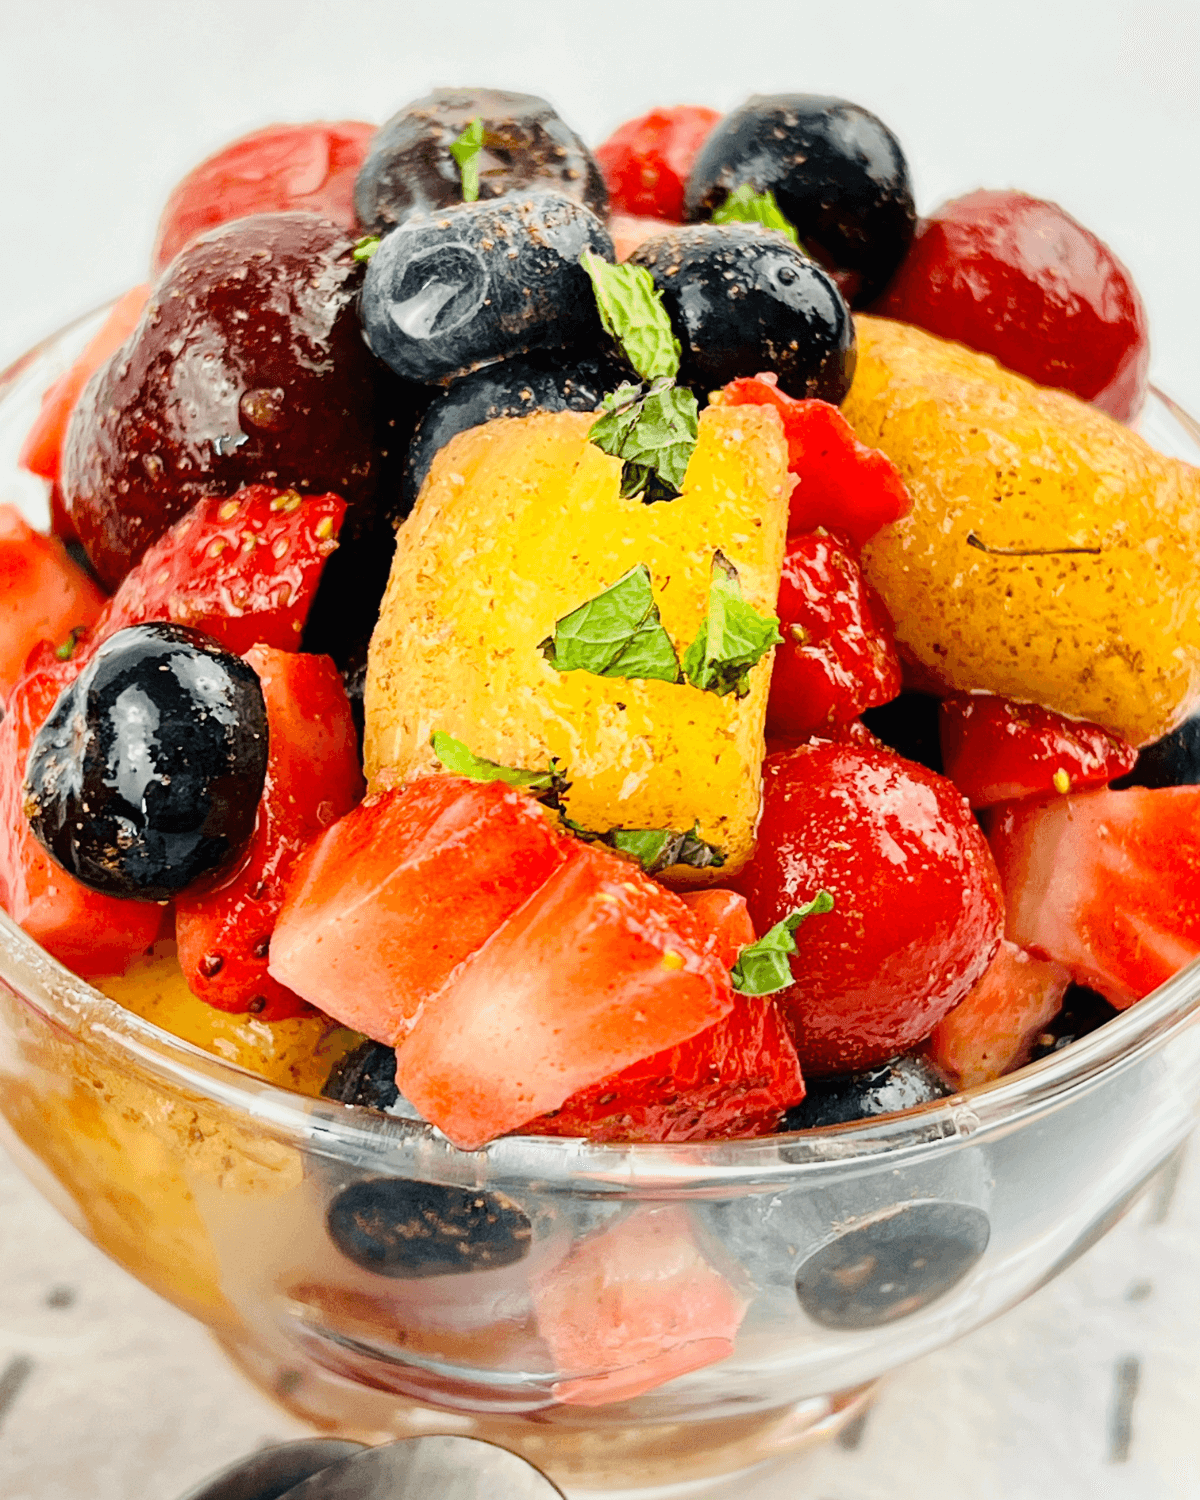 A fruit salad with honey lime dressing.